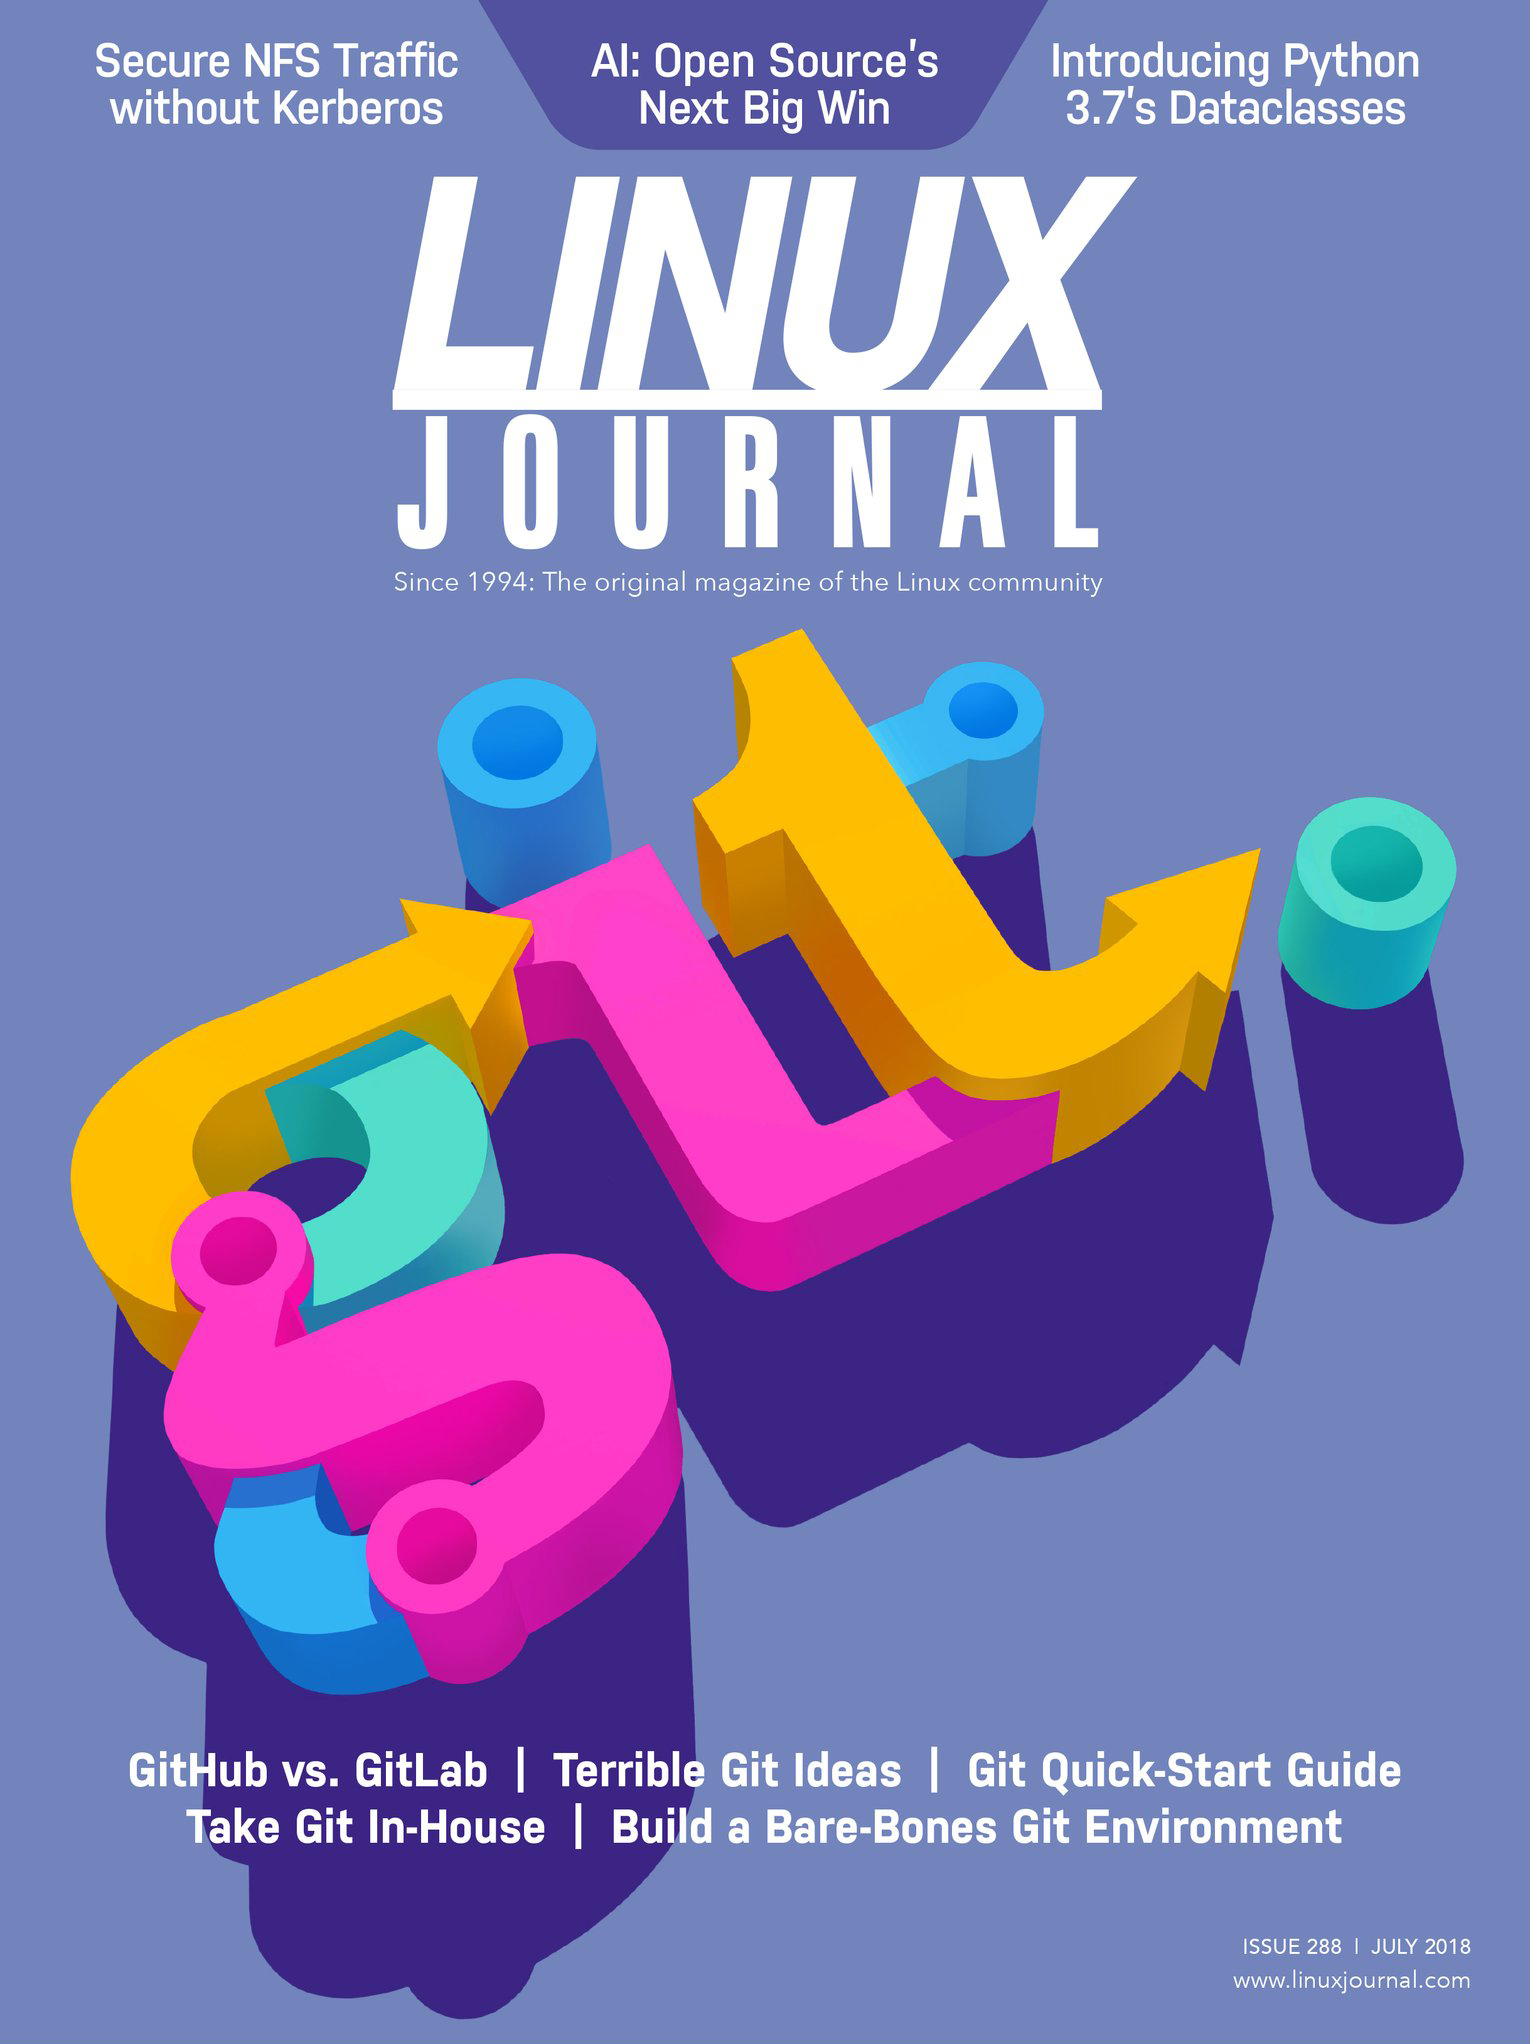 journaly linux